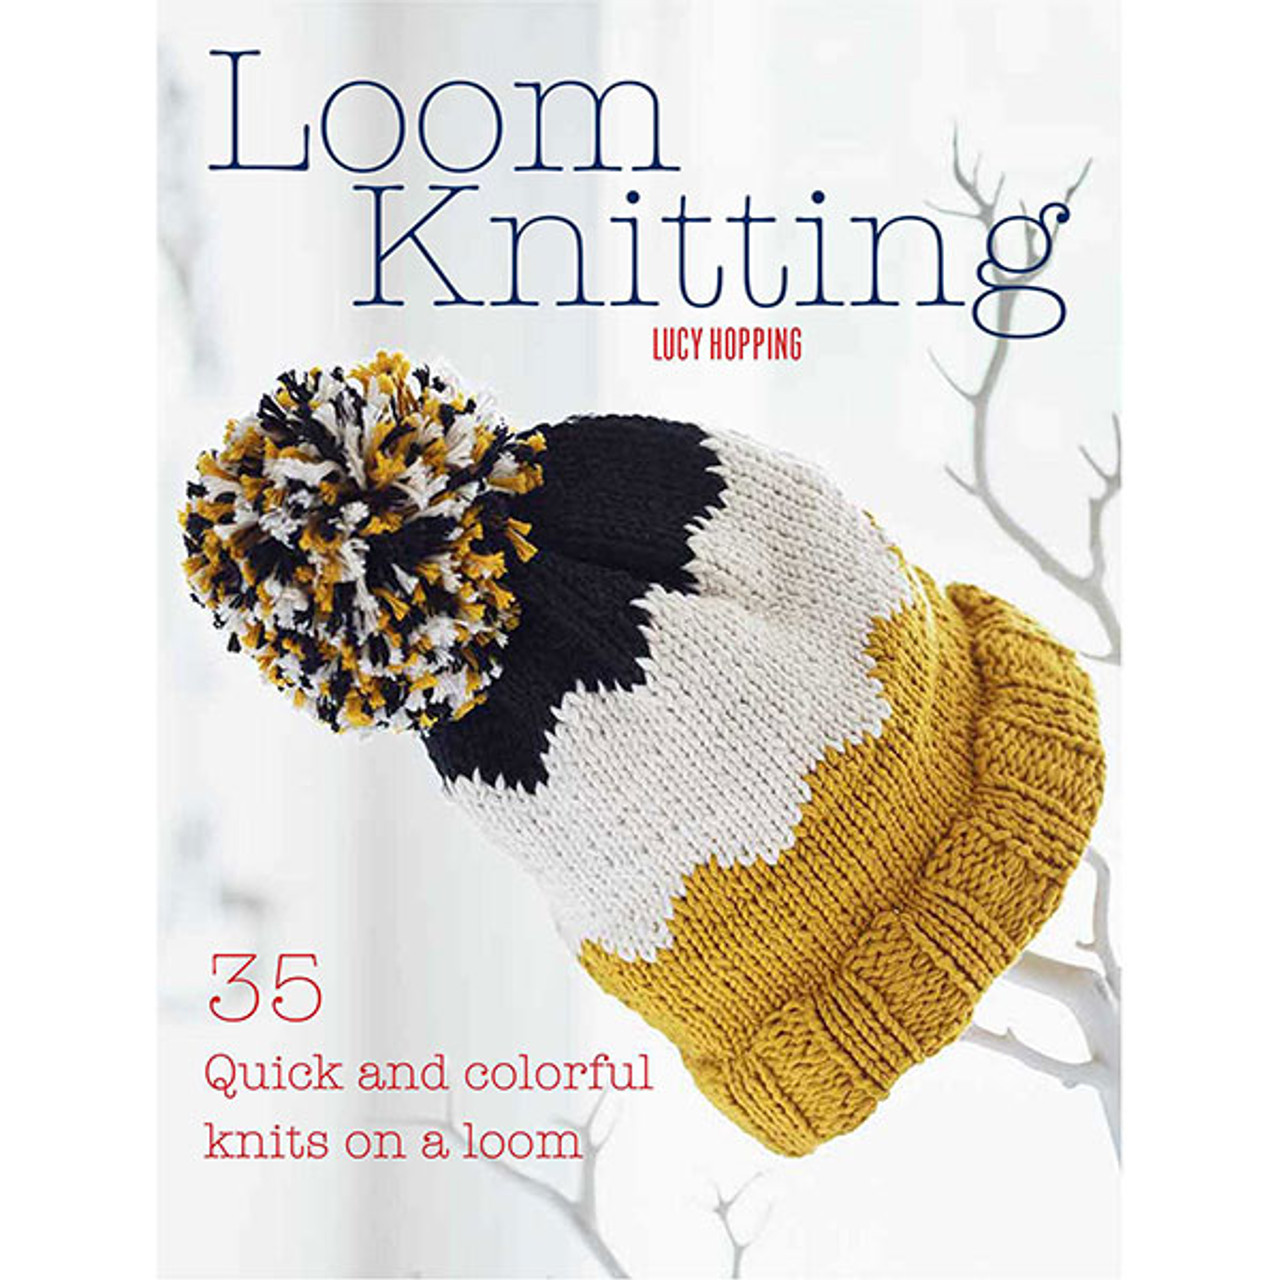 Loom Knitting Socks: A Book Review 